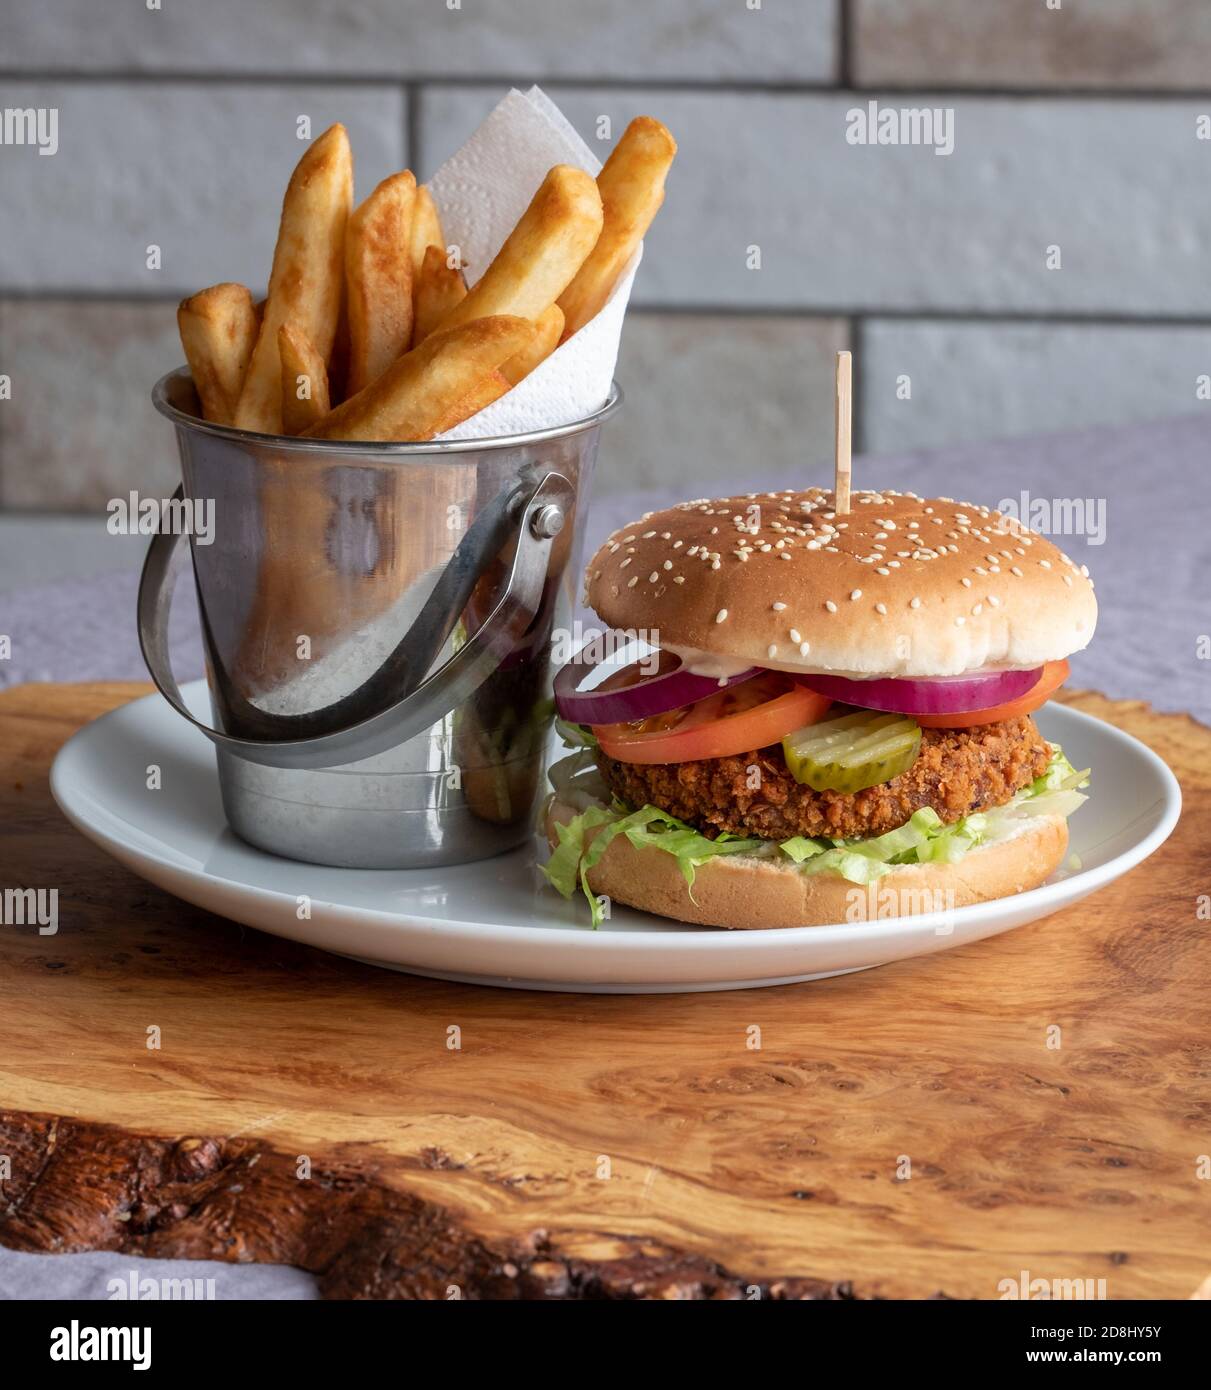 Vegan veggie soya burger in bun with salad and relish, and chips on the side. Vertical view. Stock Photo